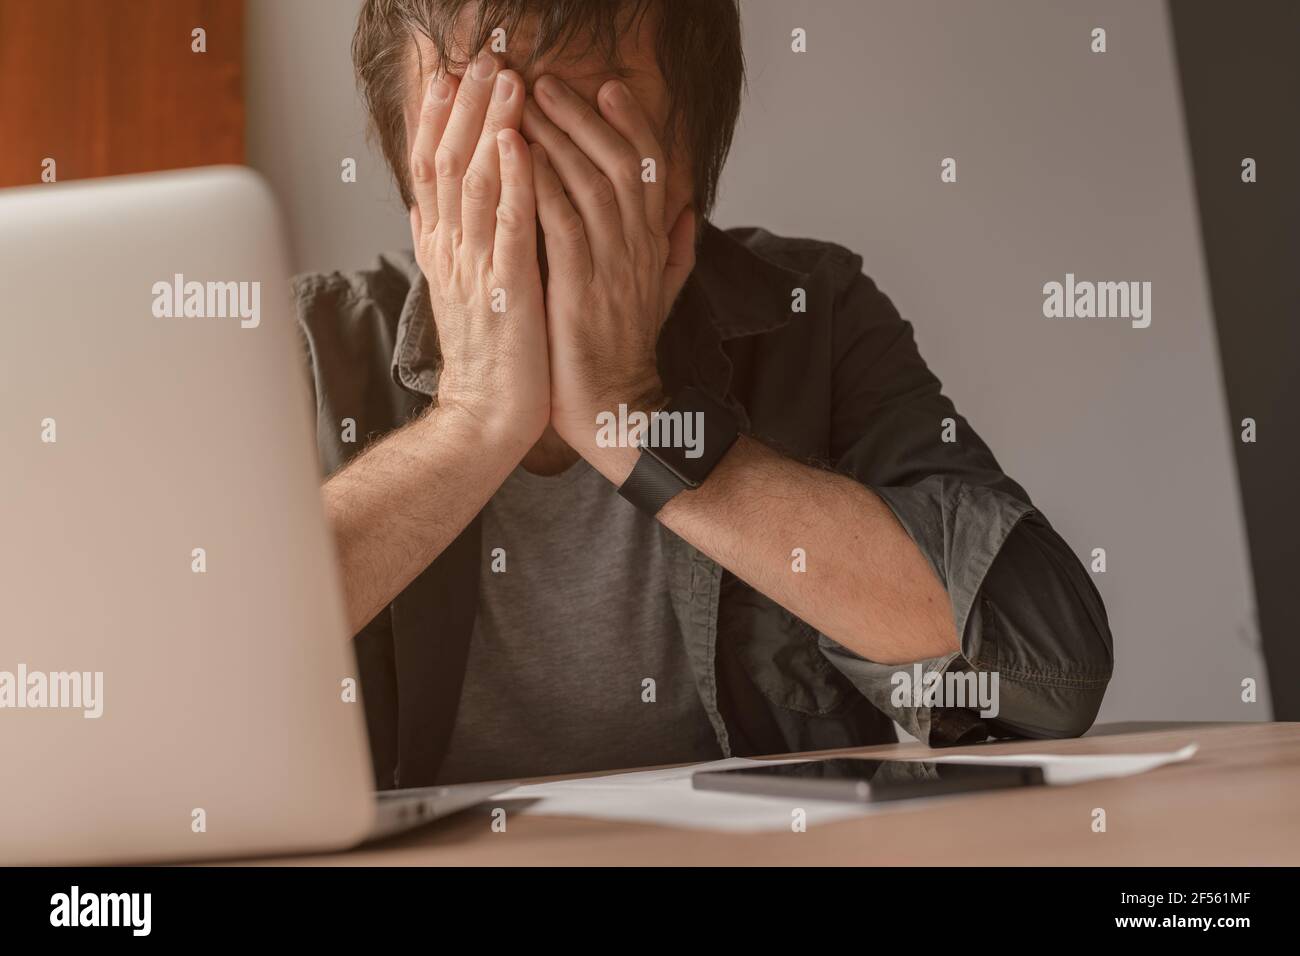 Disappointed freelancer with head in hands crying at home office desk Stock Photo